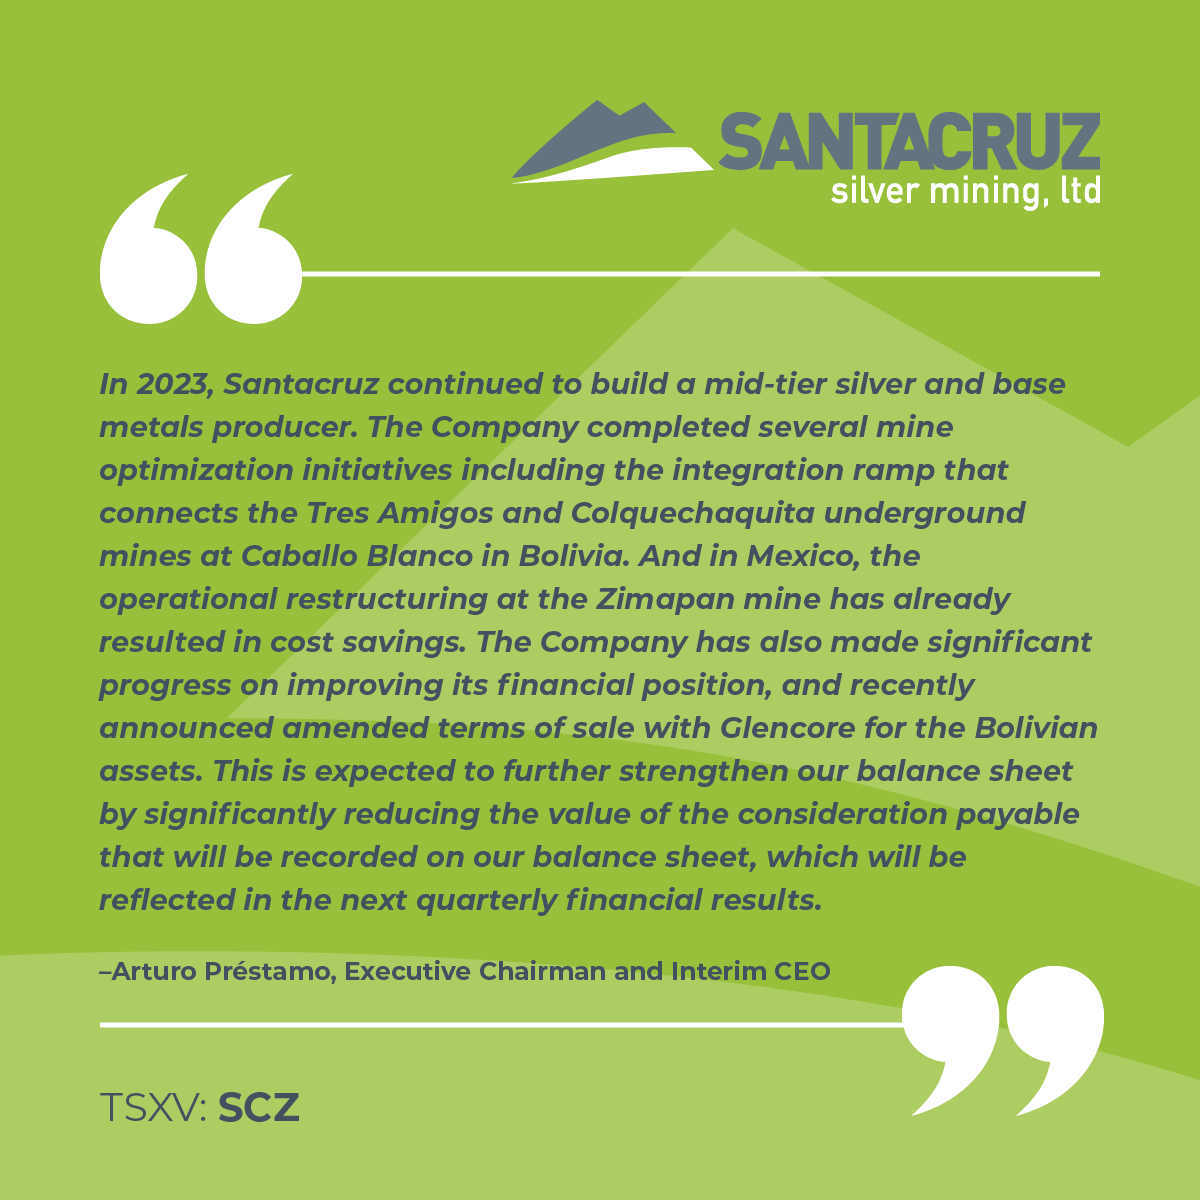 Arturo Préstamo, Executive Chairman & Interim CEO, recently highlighted major milestones we have accomplished in 2023 in our latest news release. Learn more about our Q4 and year end 2023 financial results 👇 bit.ly/3JQFH4B $SCZ #SantacruzSilver #SilverMining…